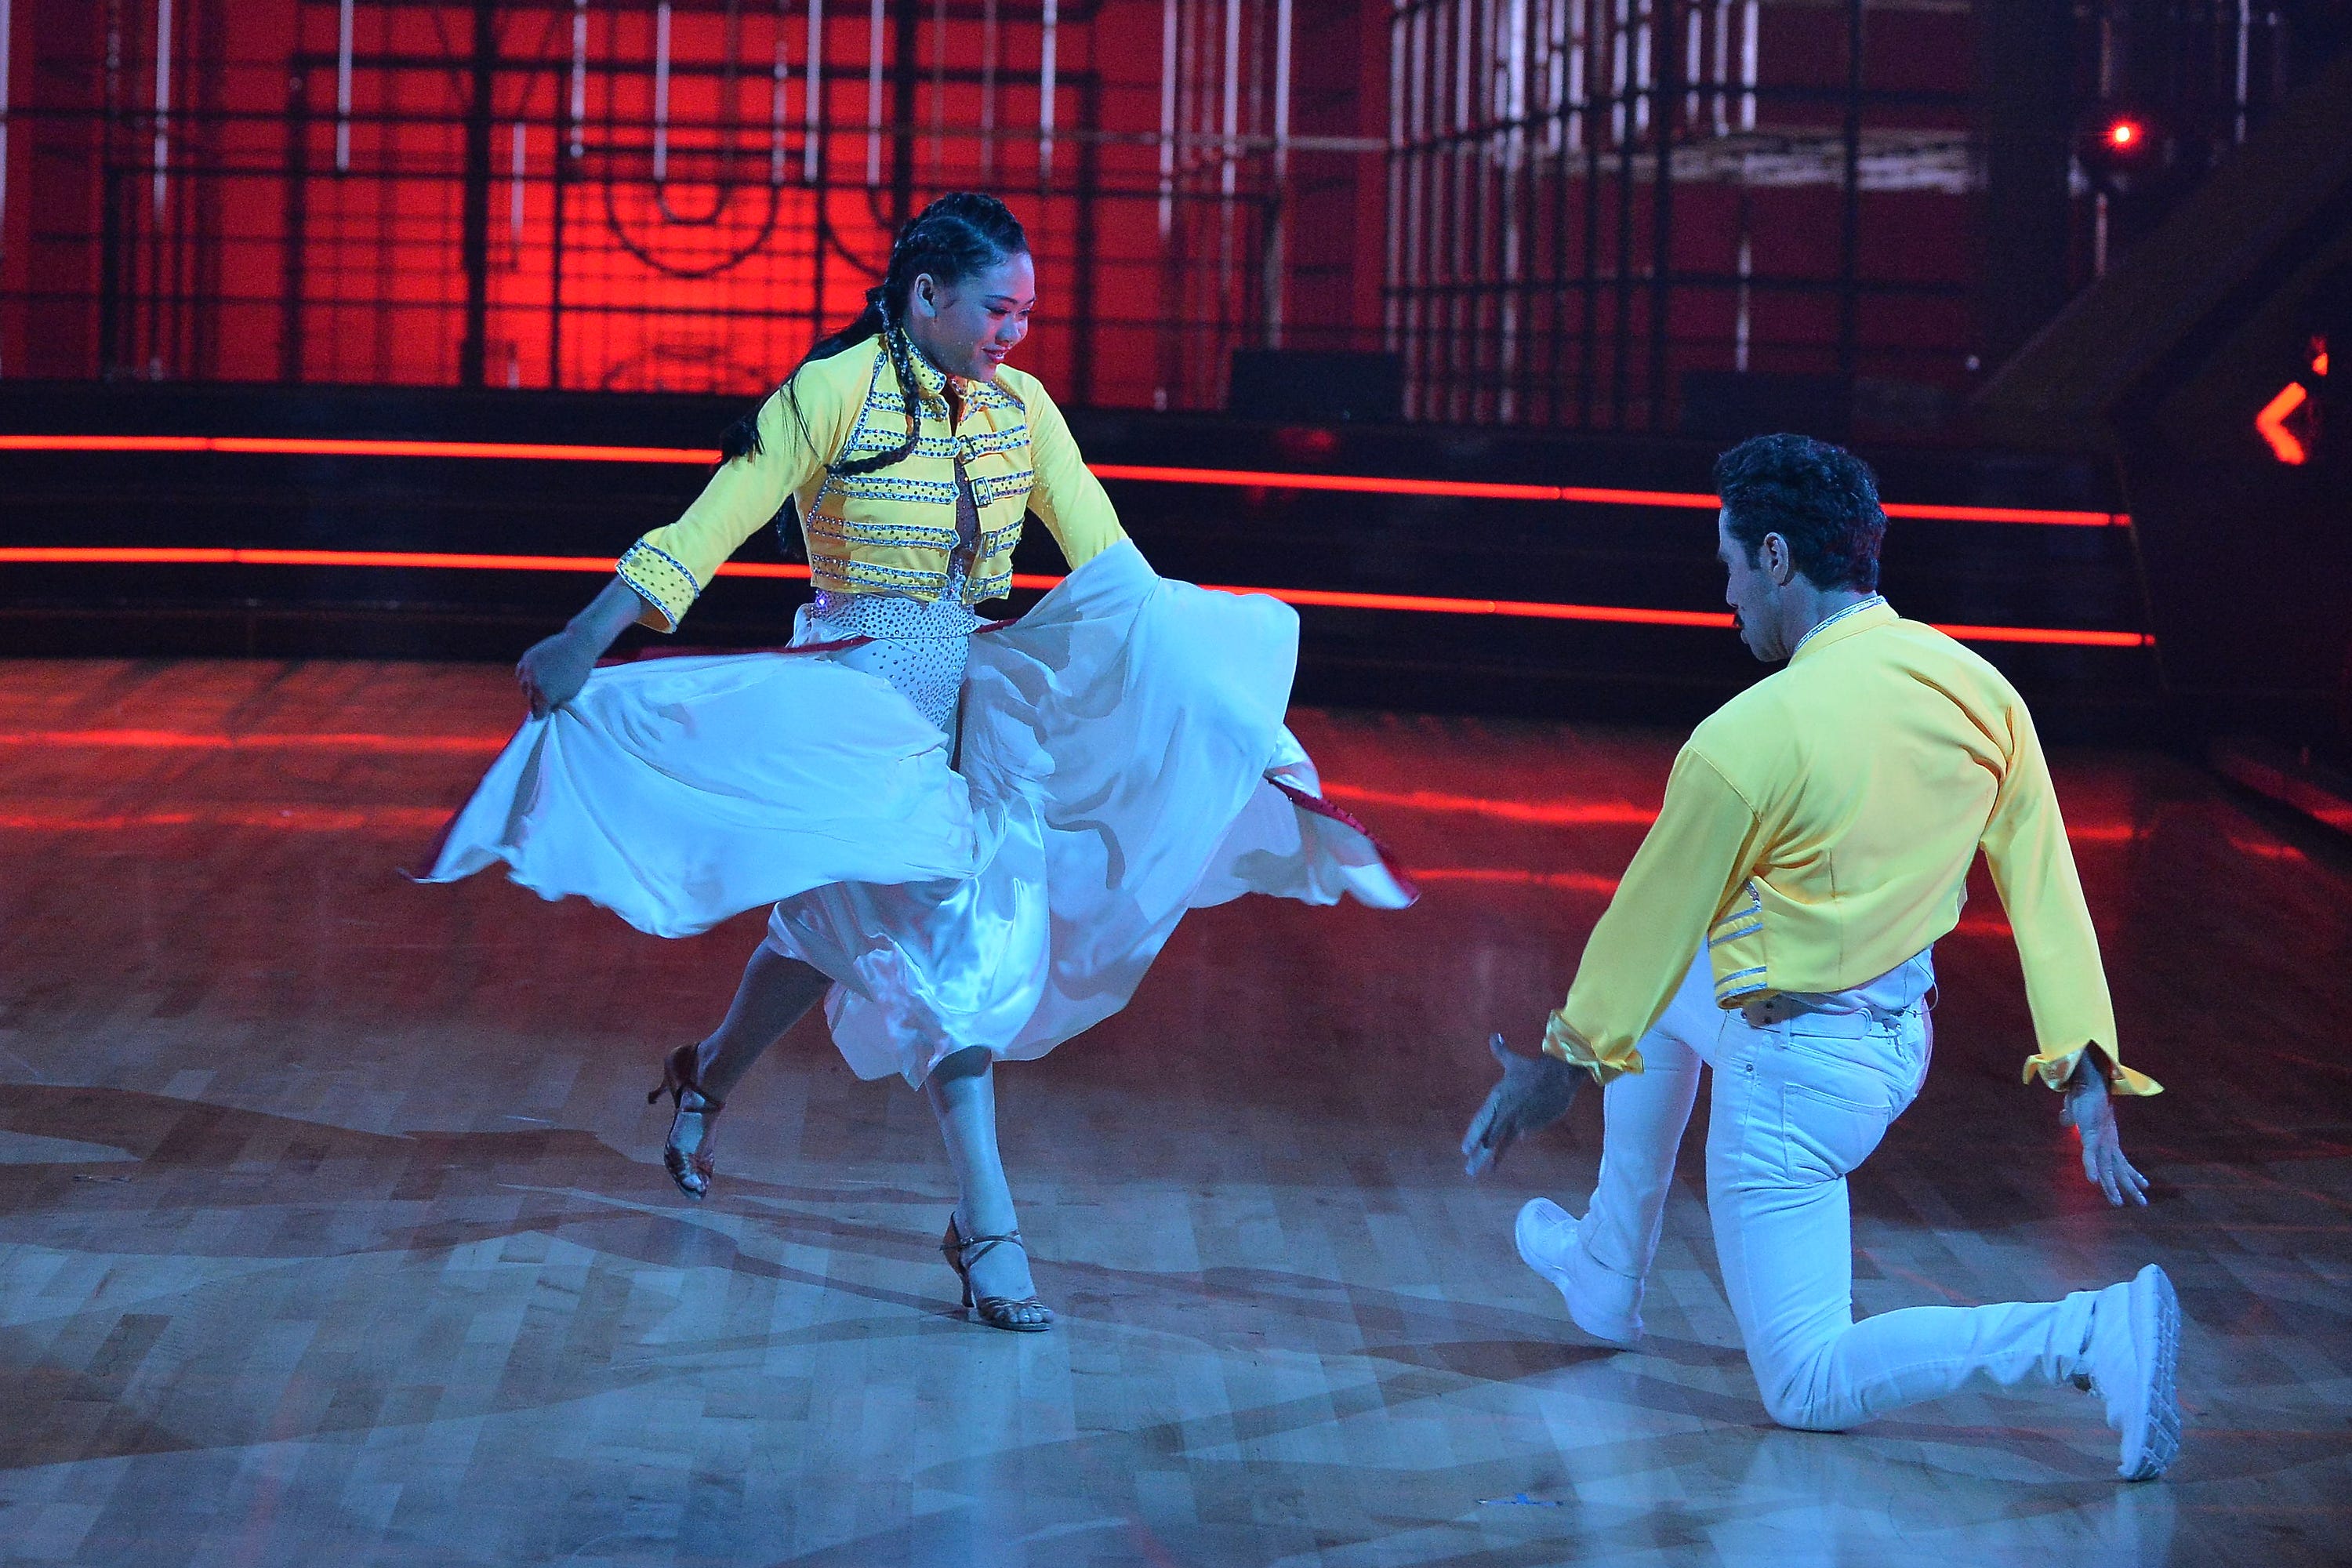 DWTS': Suni Lee exits stage with stomach illness, makes warrior return